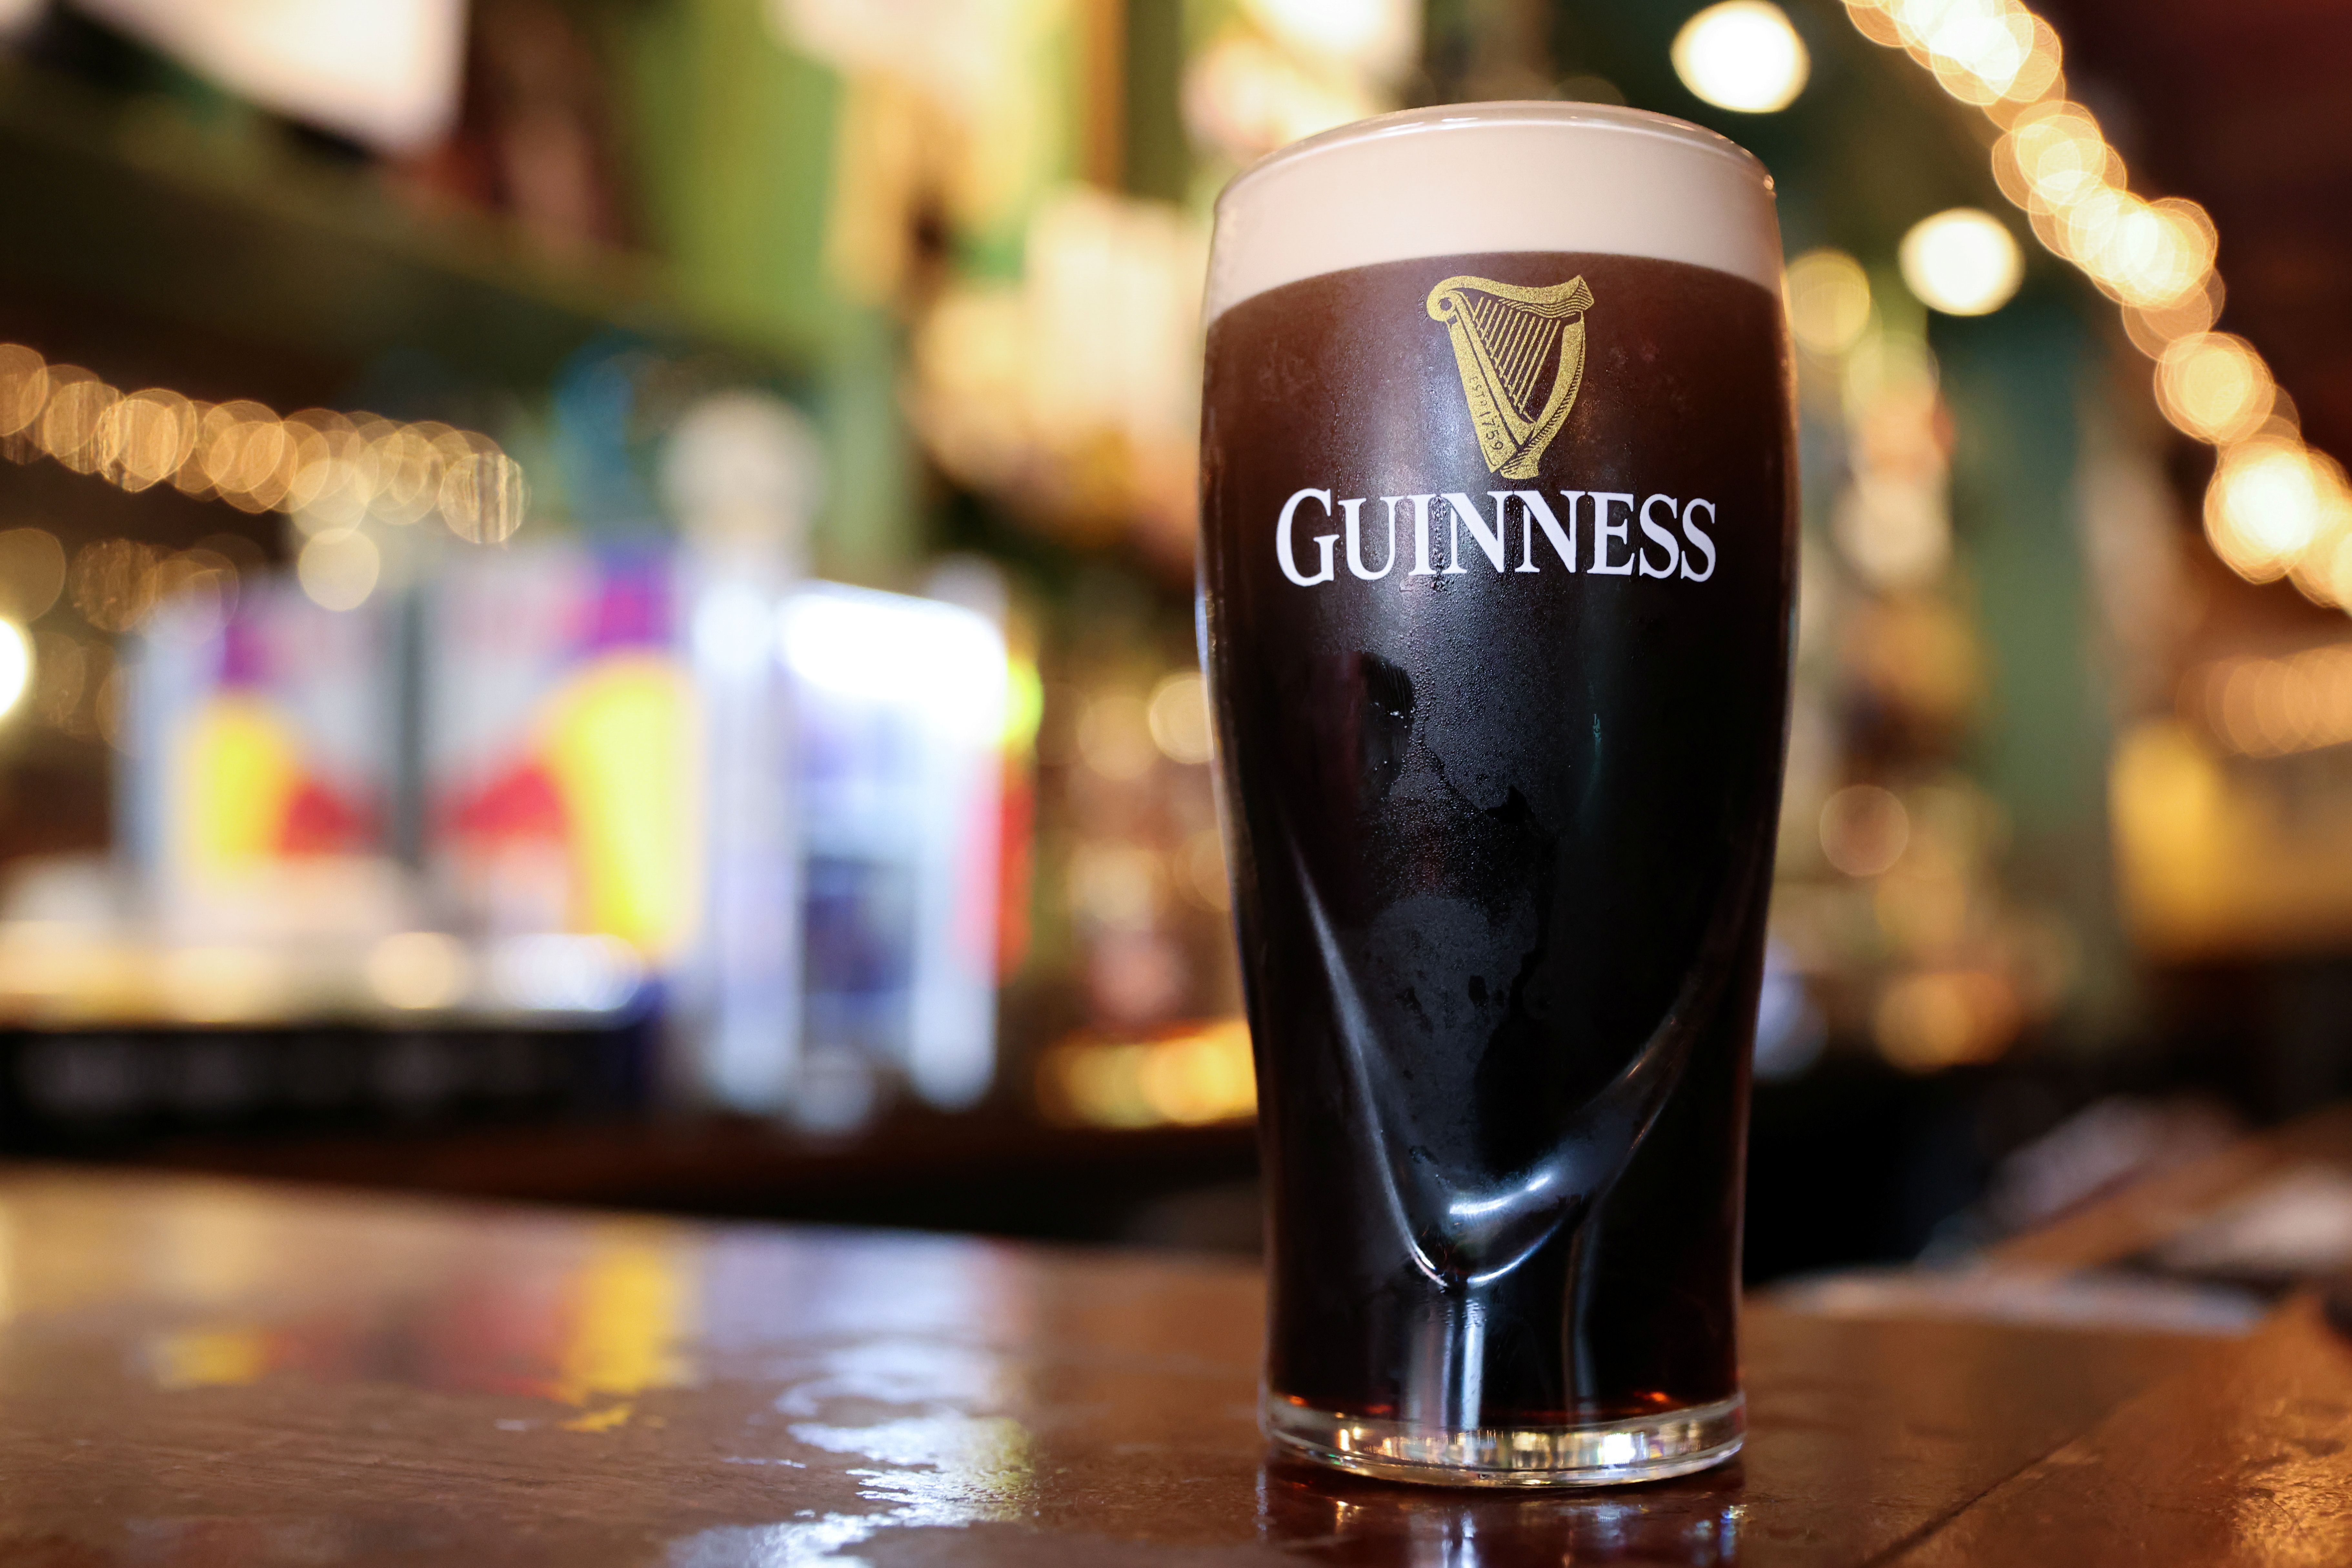 A pint of Guinness beer, a brand of Diageo, is seen in this photo illustration